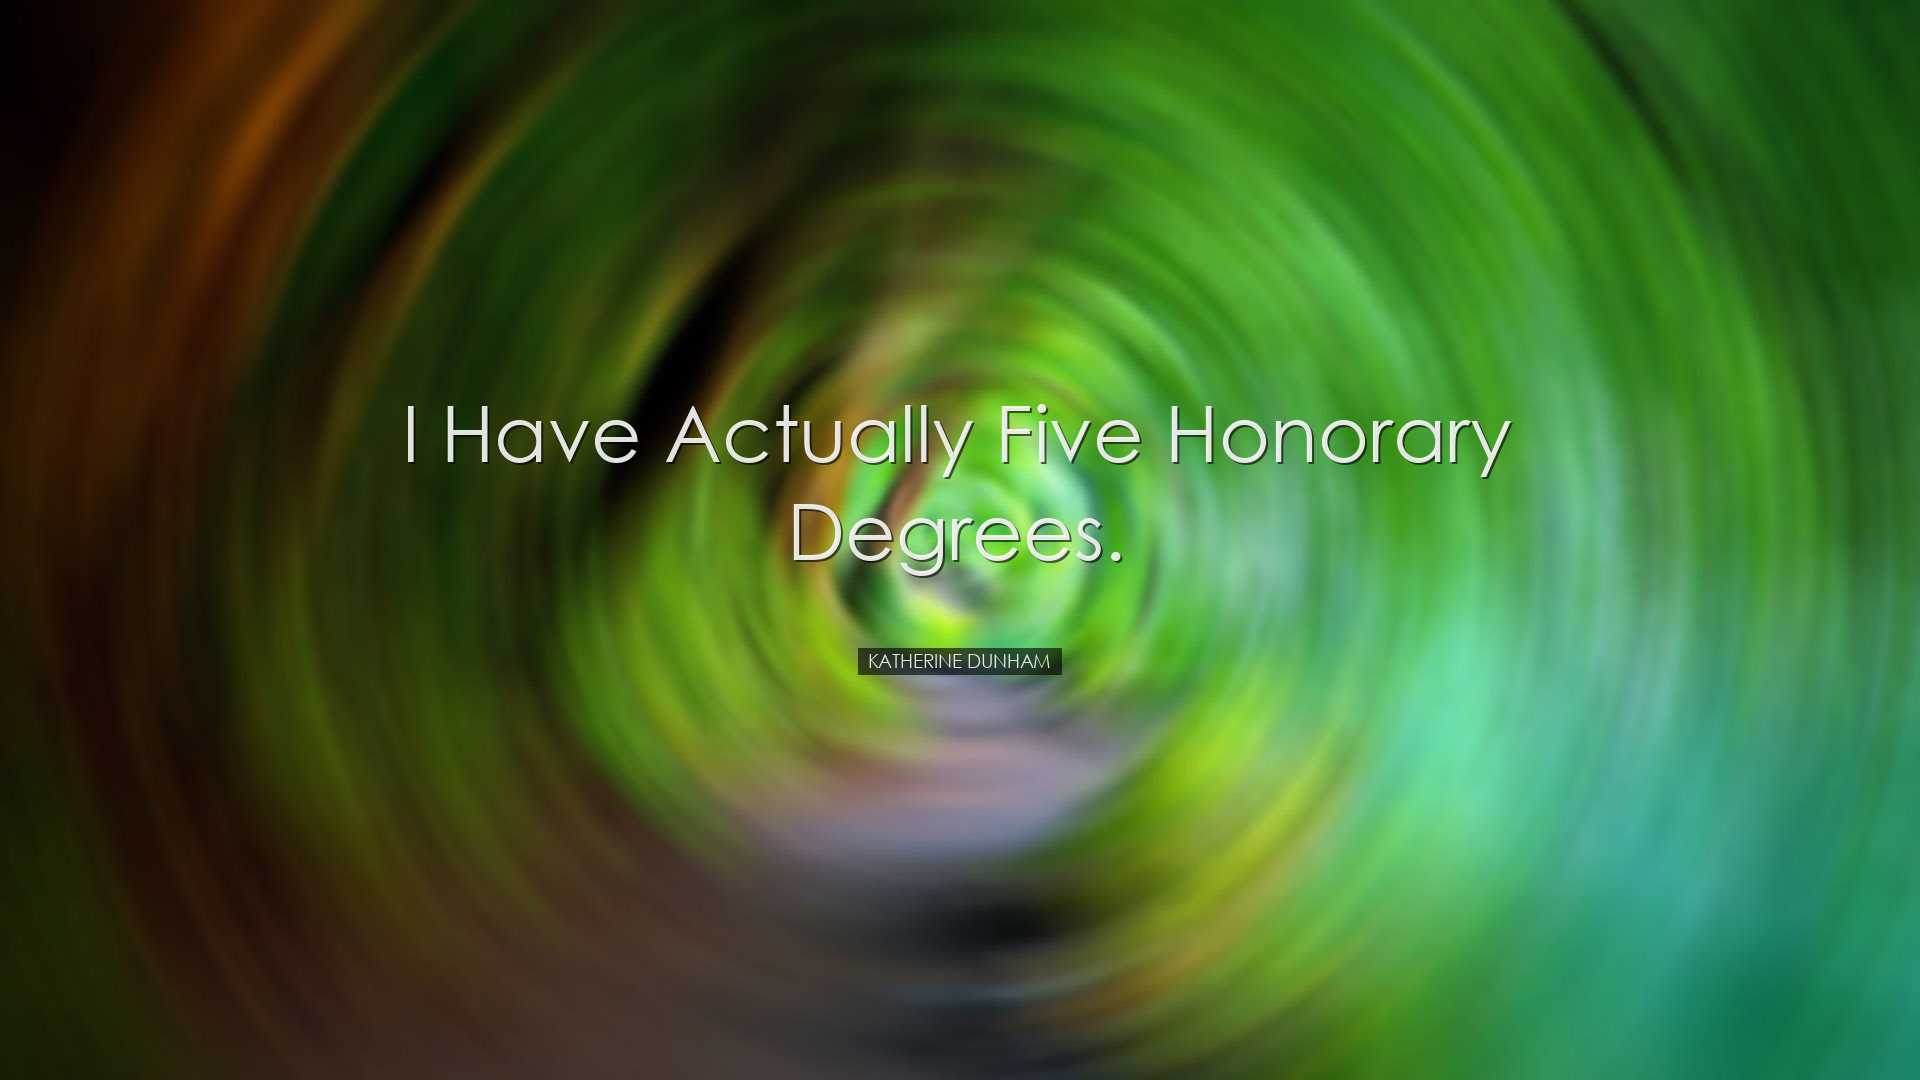 I have actually five honorary degrees. - Katherine Dunham